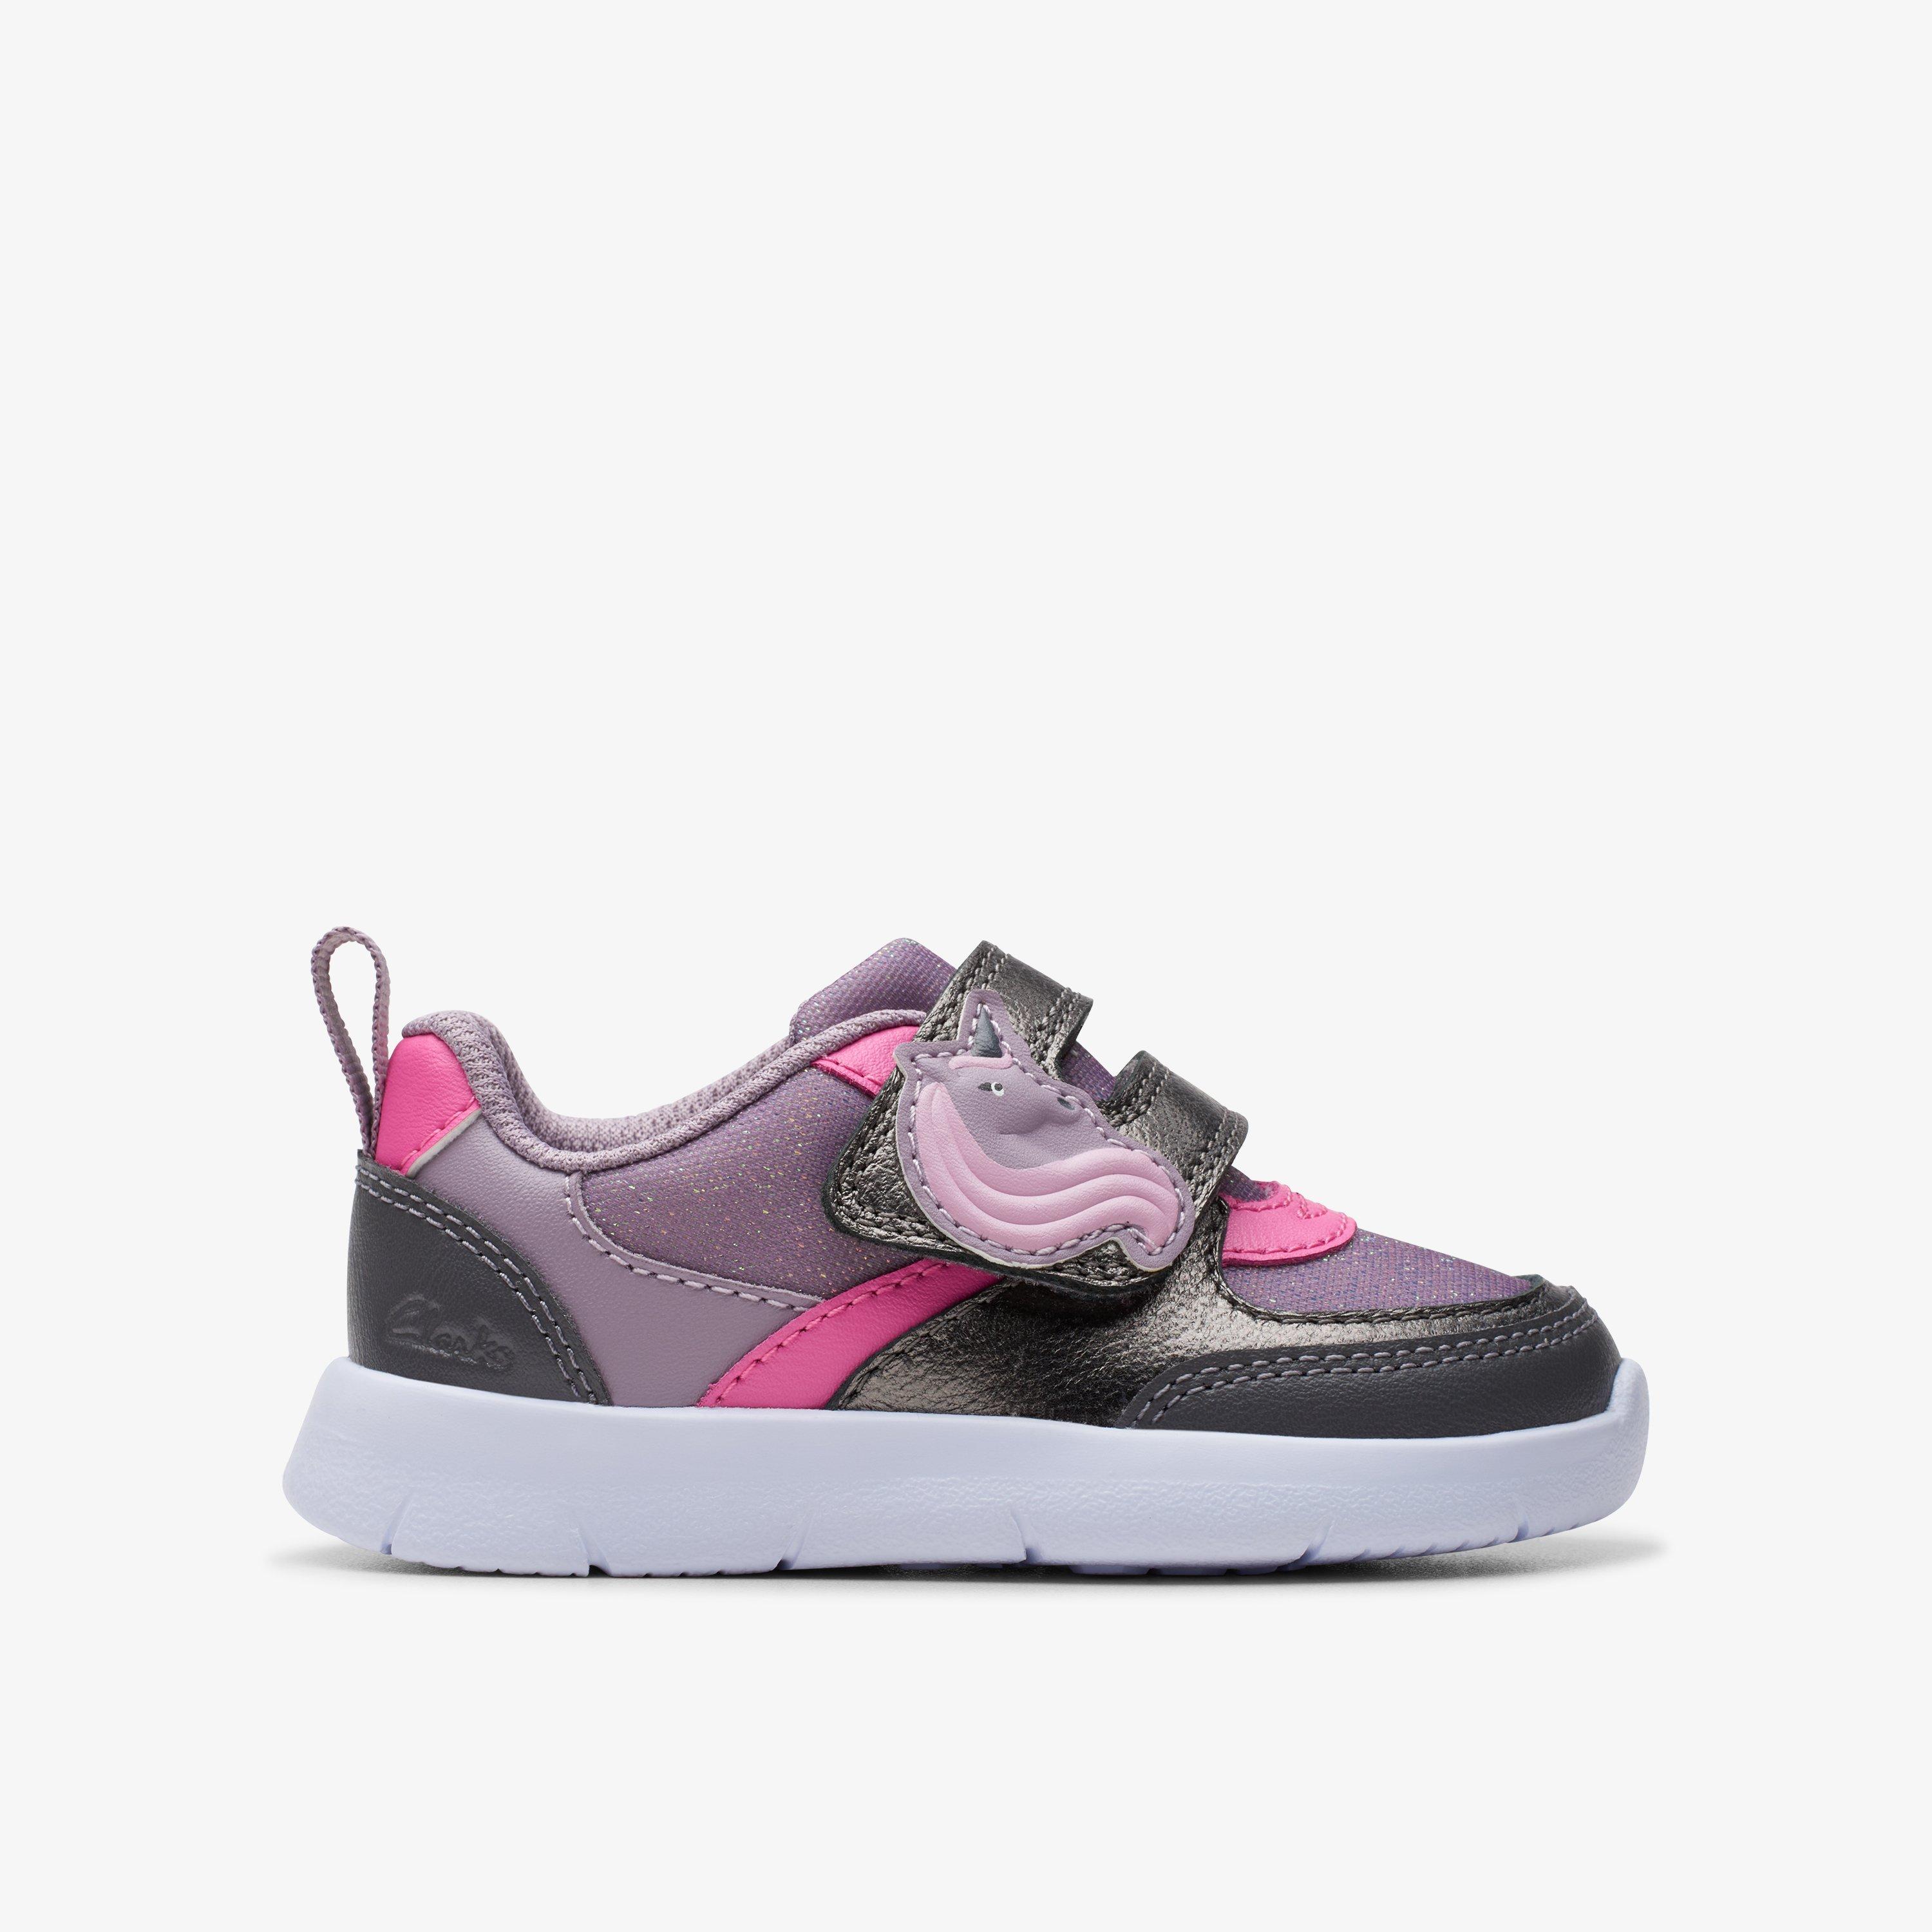 Girls Ath Shimmer Toddler Purple Trainers | Clarks UK